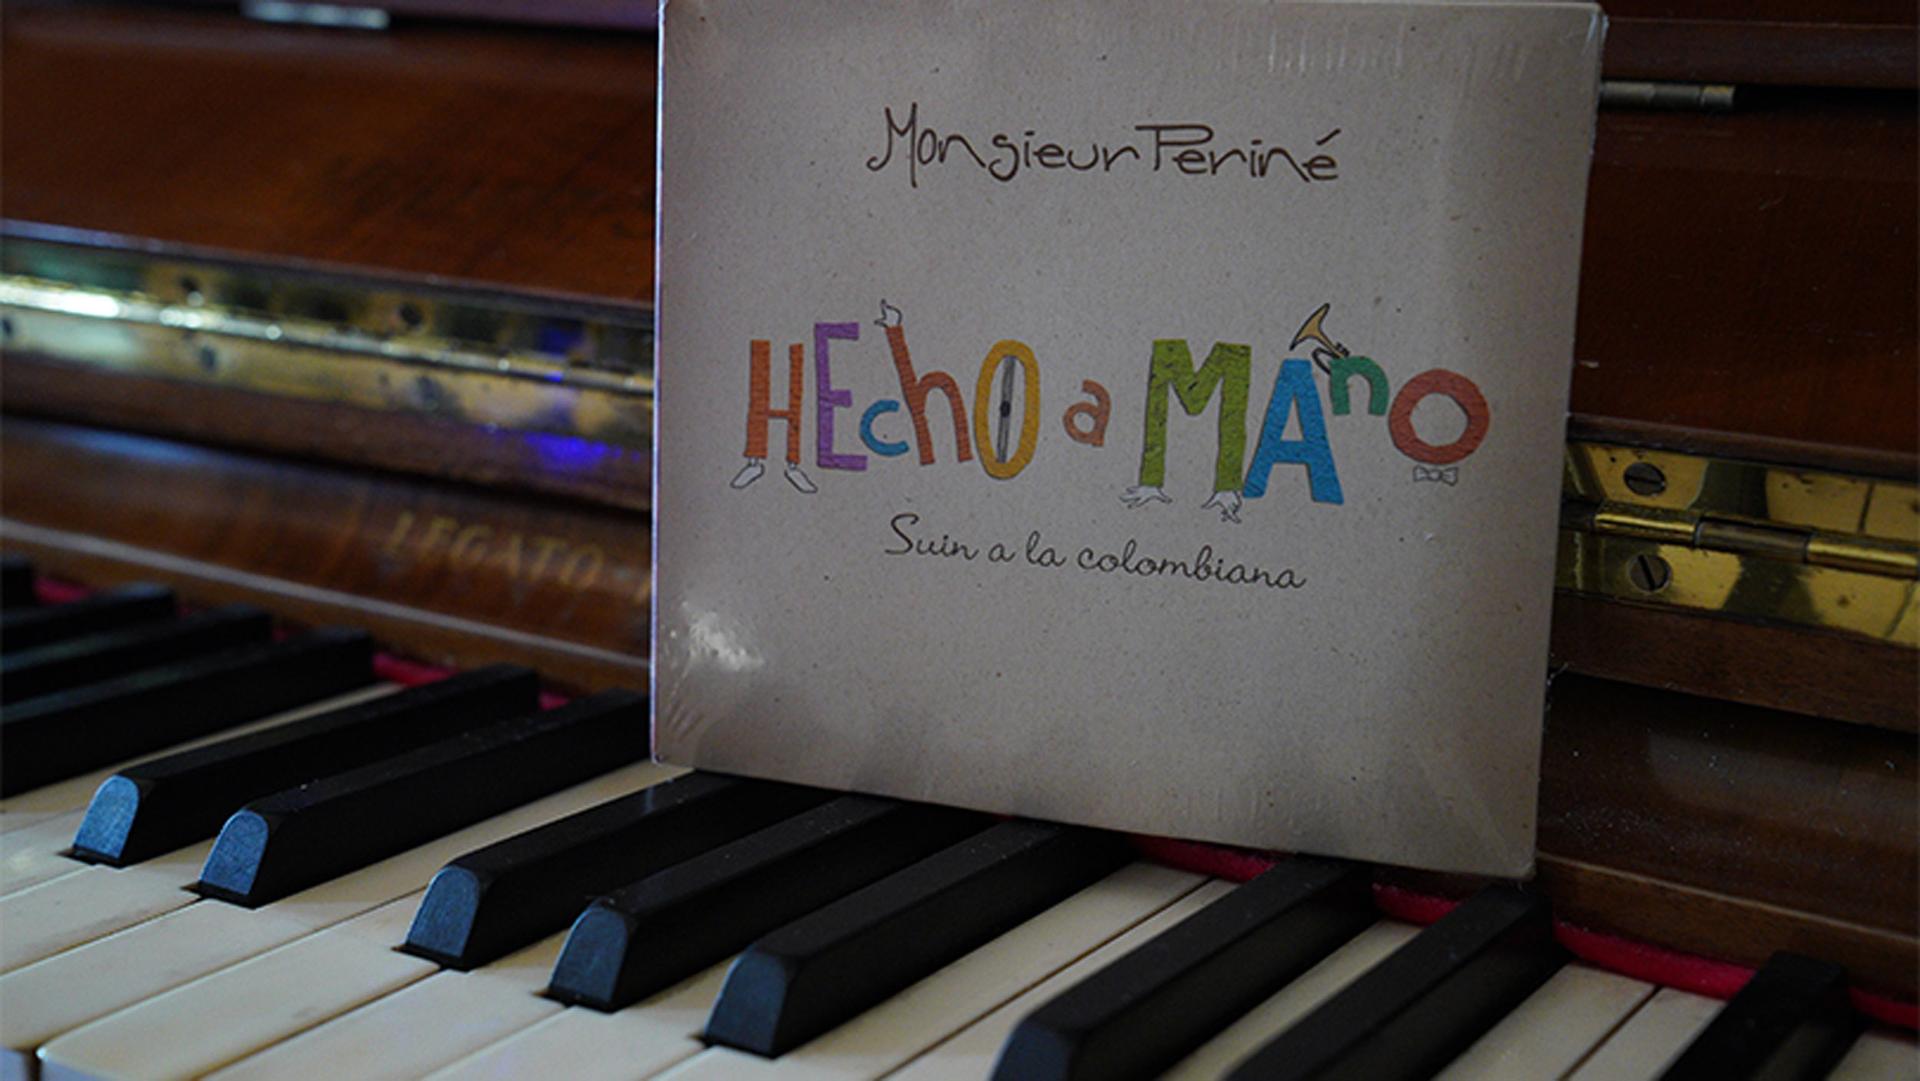 Monsieur Perine's first album, "Hecho a Mano" was published in 2012. Since then the band has produced two more albums. 